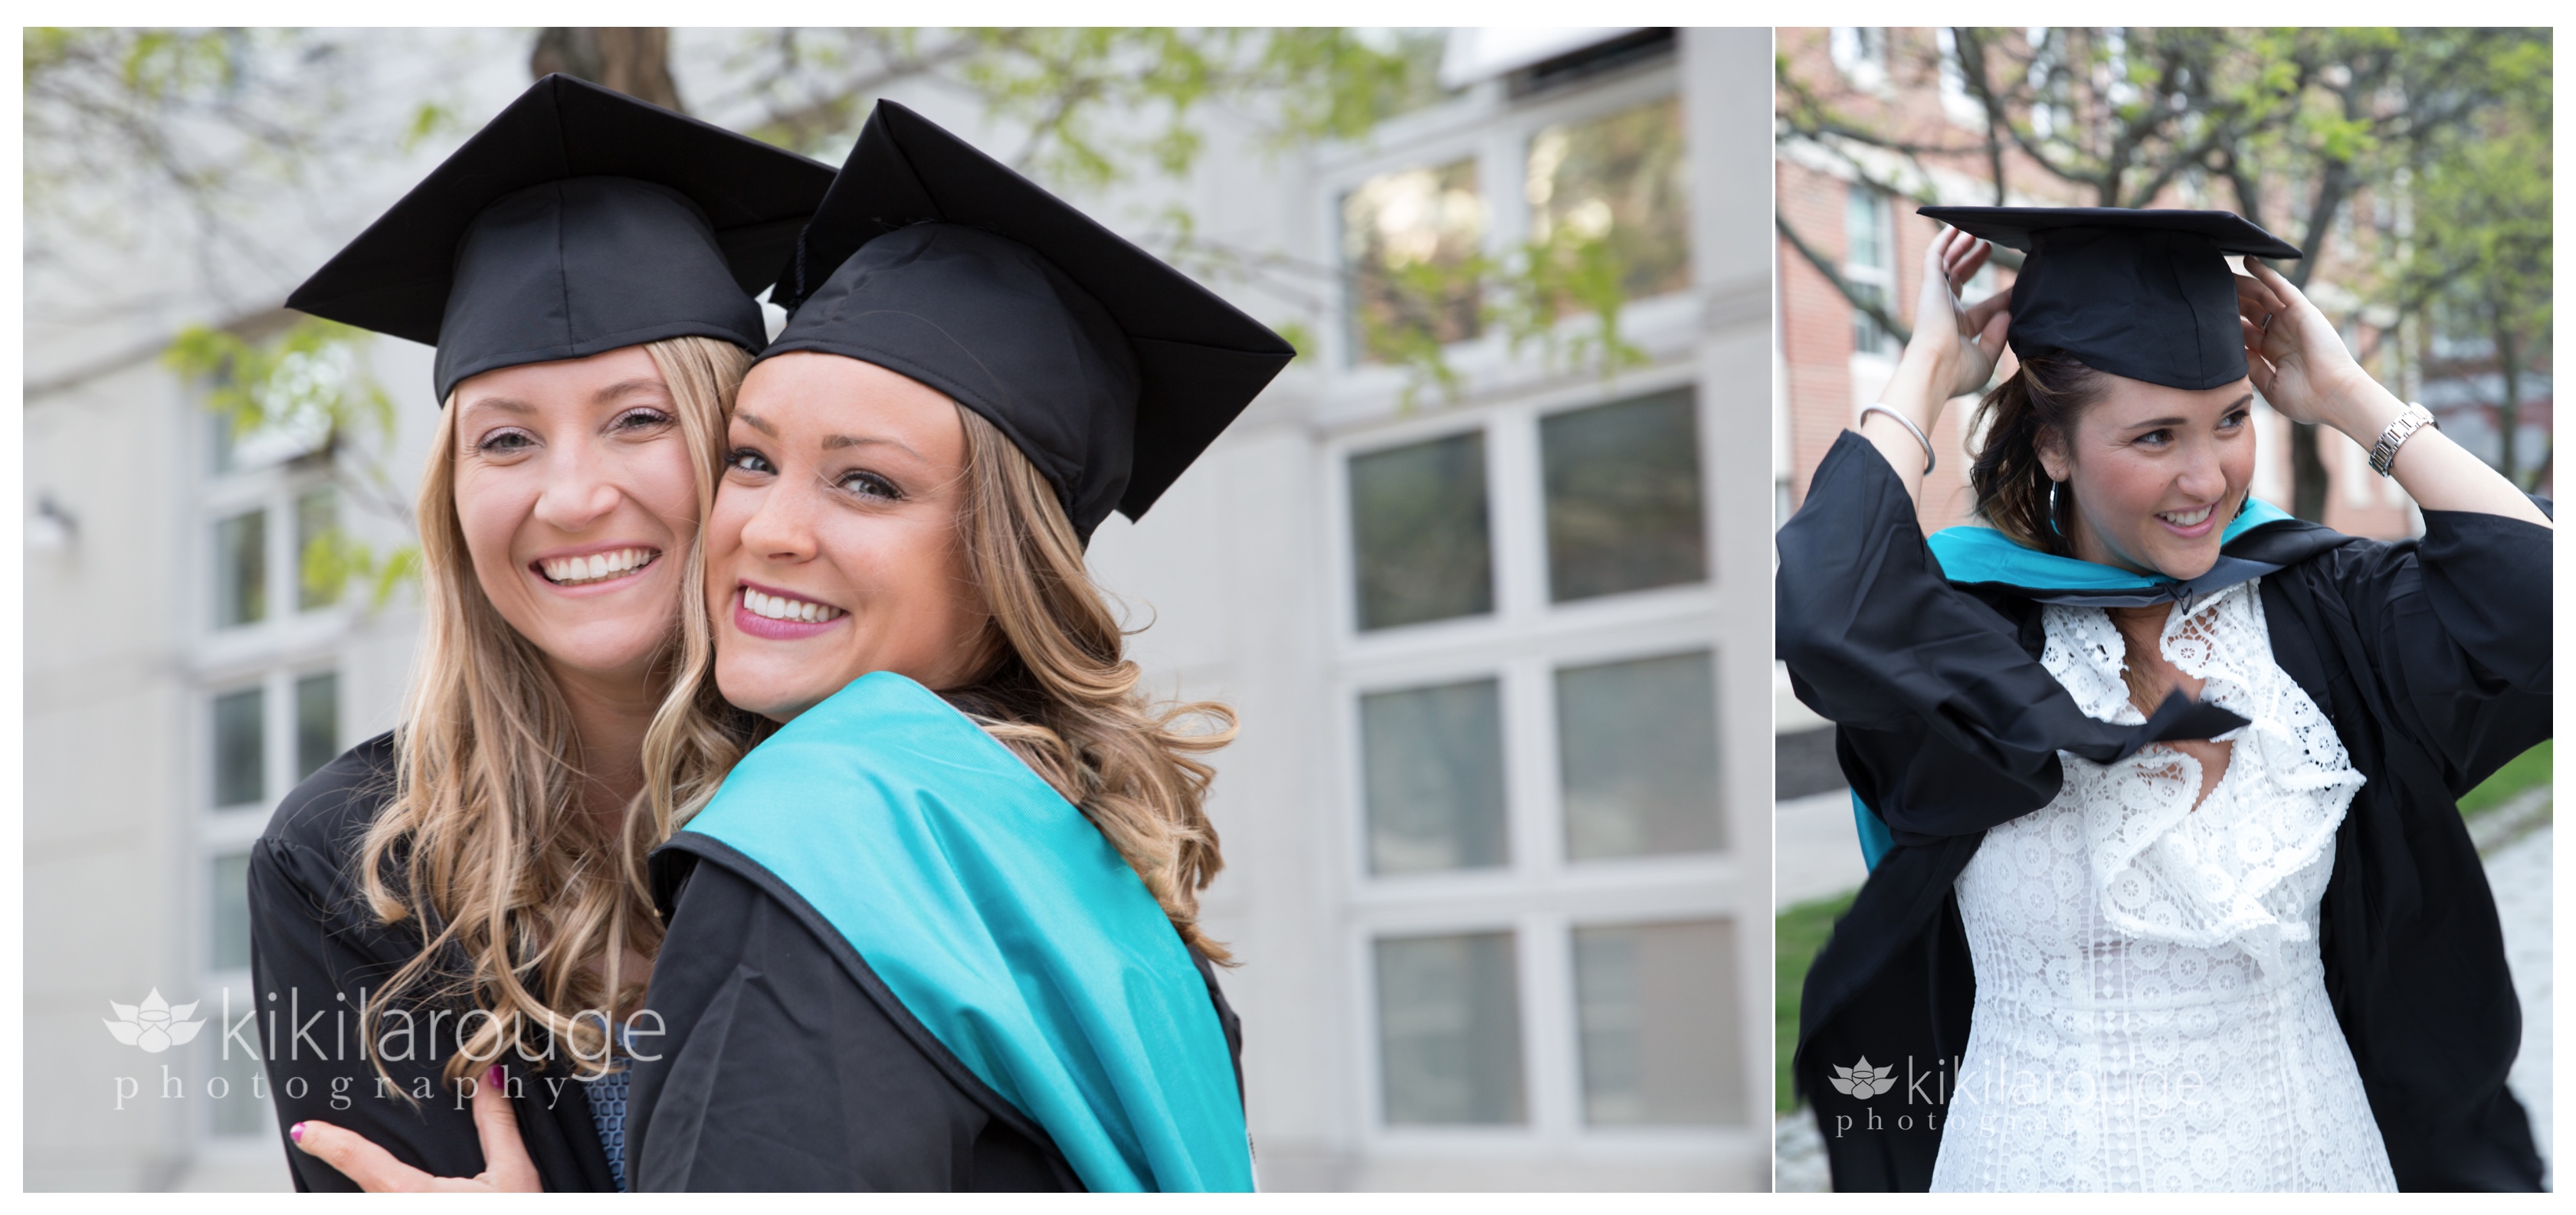 MGH Masters Graduate in Cap and Gown